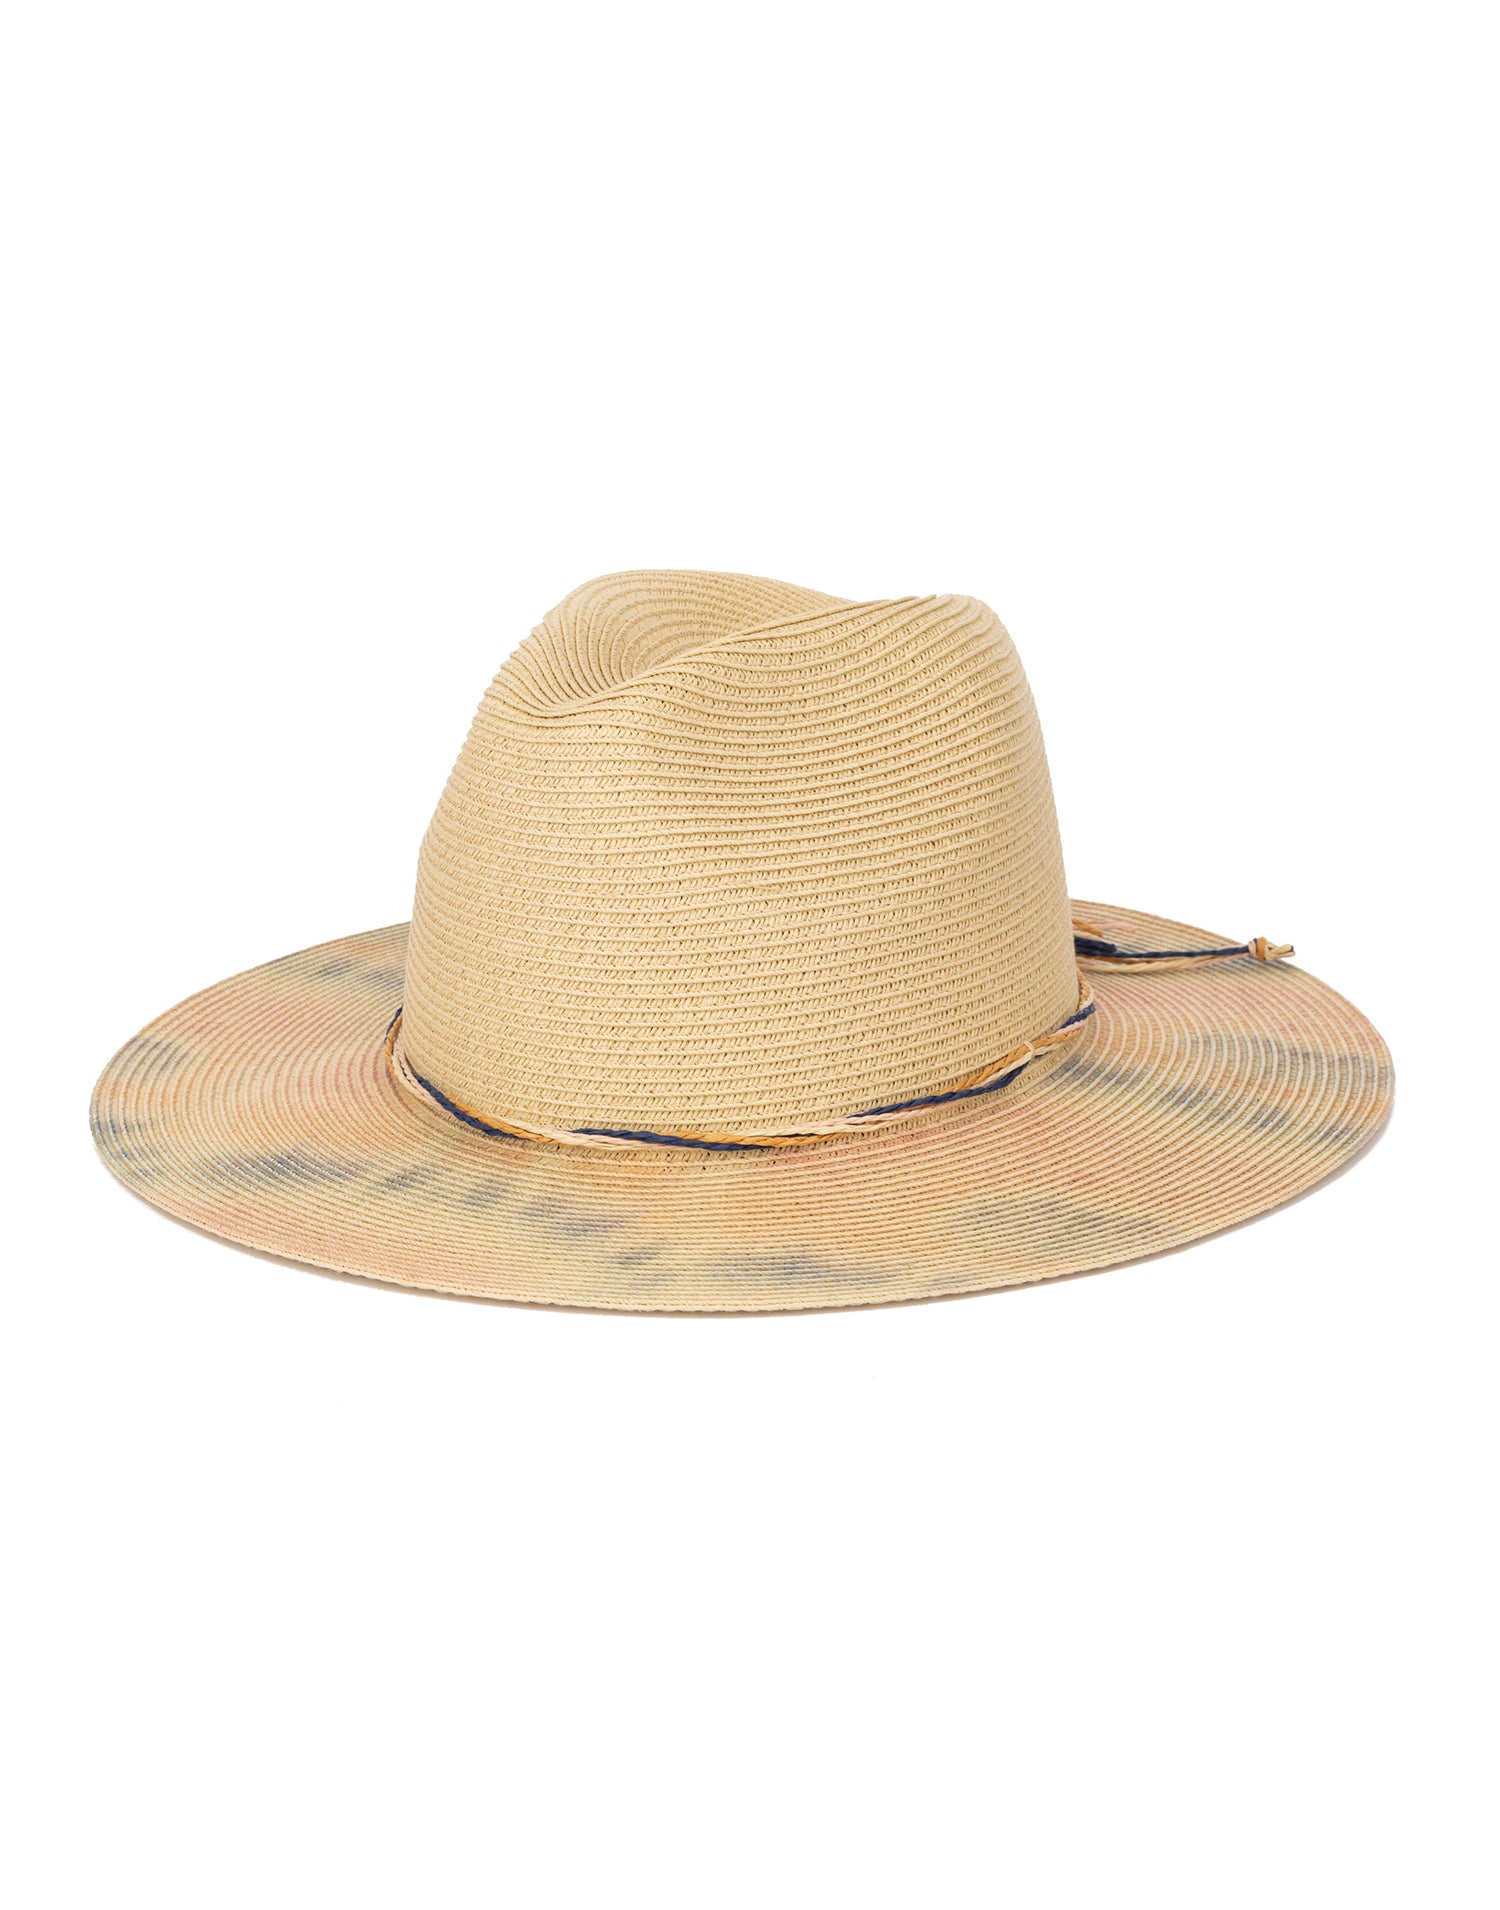 Wild Child Fedora in Natural/Tie Dye by San Diego Hat Company - Product View